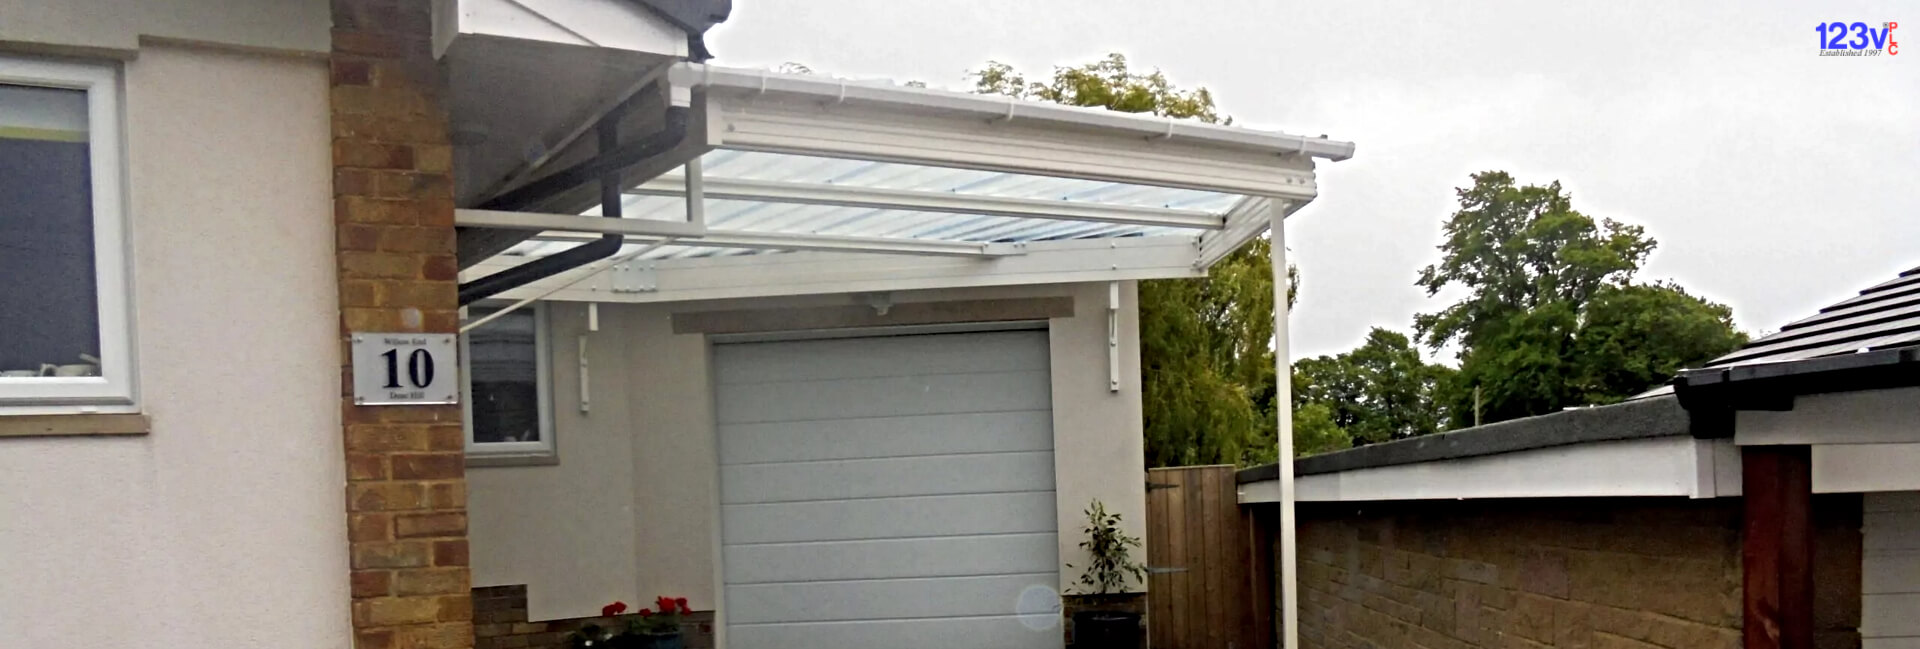 Traditional Carport Canopy Yorkshire by 123v